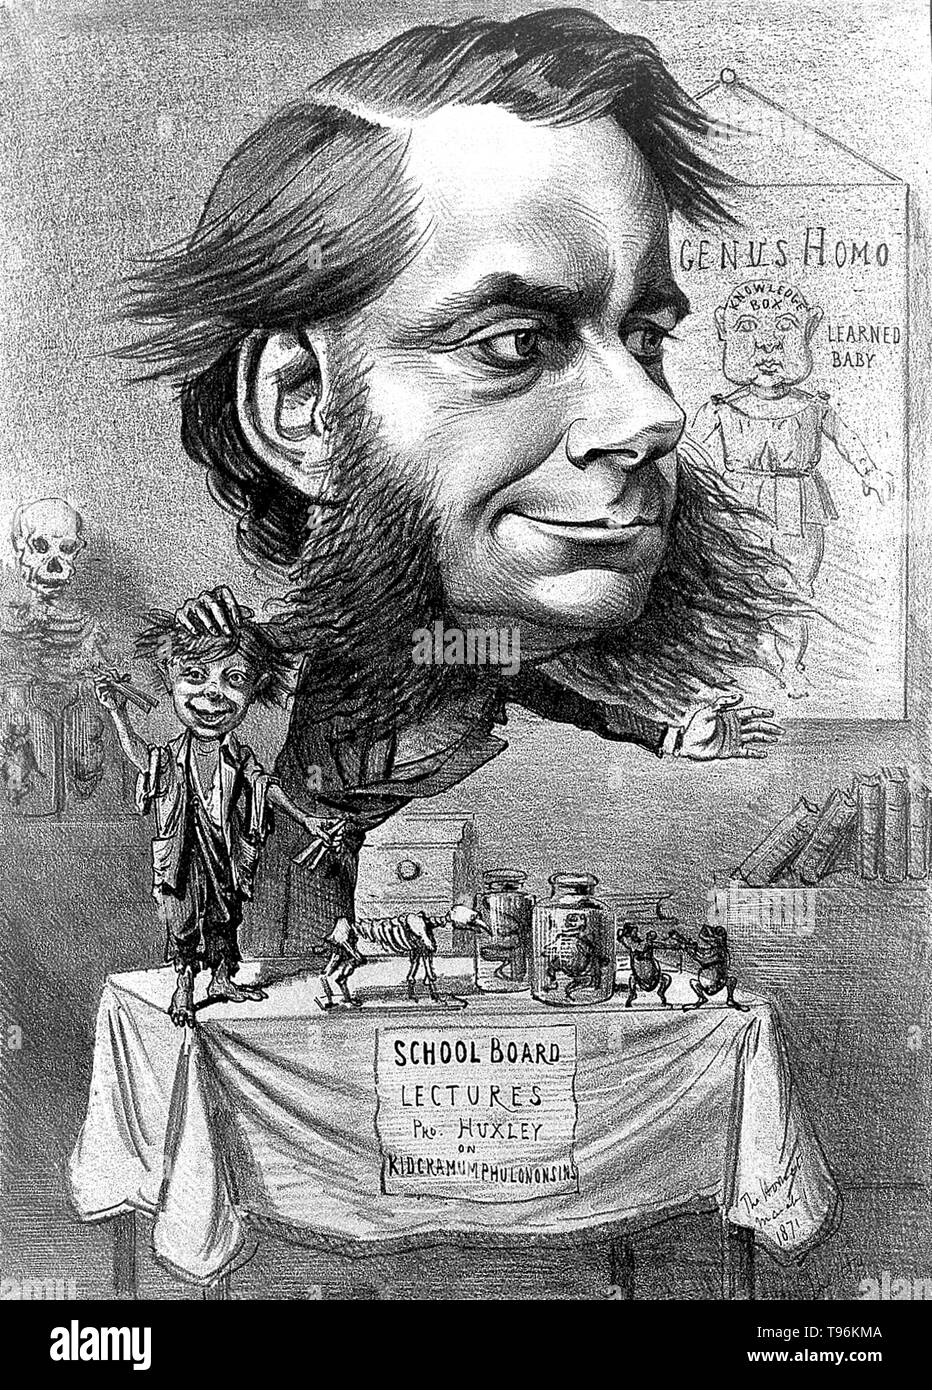 Thomas Henry Huxley (May 4, 1825 - June 29, 1895) was an English biologist, known as ''Darwin's Bulldog'' for his advocacy of Charles Darwin's theory of evolution. Huxley's famous 1860 debate with Samuel Wilberforce was a key moment in the wider acceptance of evolution, and in his own career. Huxley was slow to accept some of Darwin's ideas, such as gradualism, and was undecided about natural selection, but despite this he was wholehearted in his public support of Darwin. Stock Photo